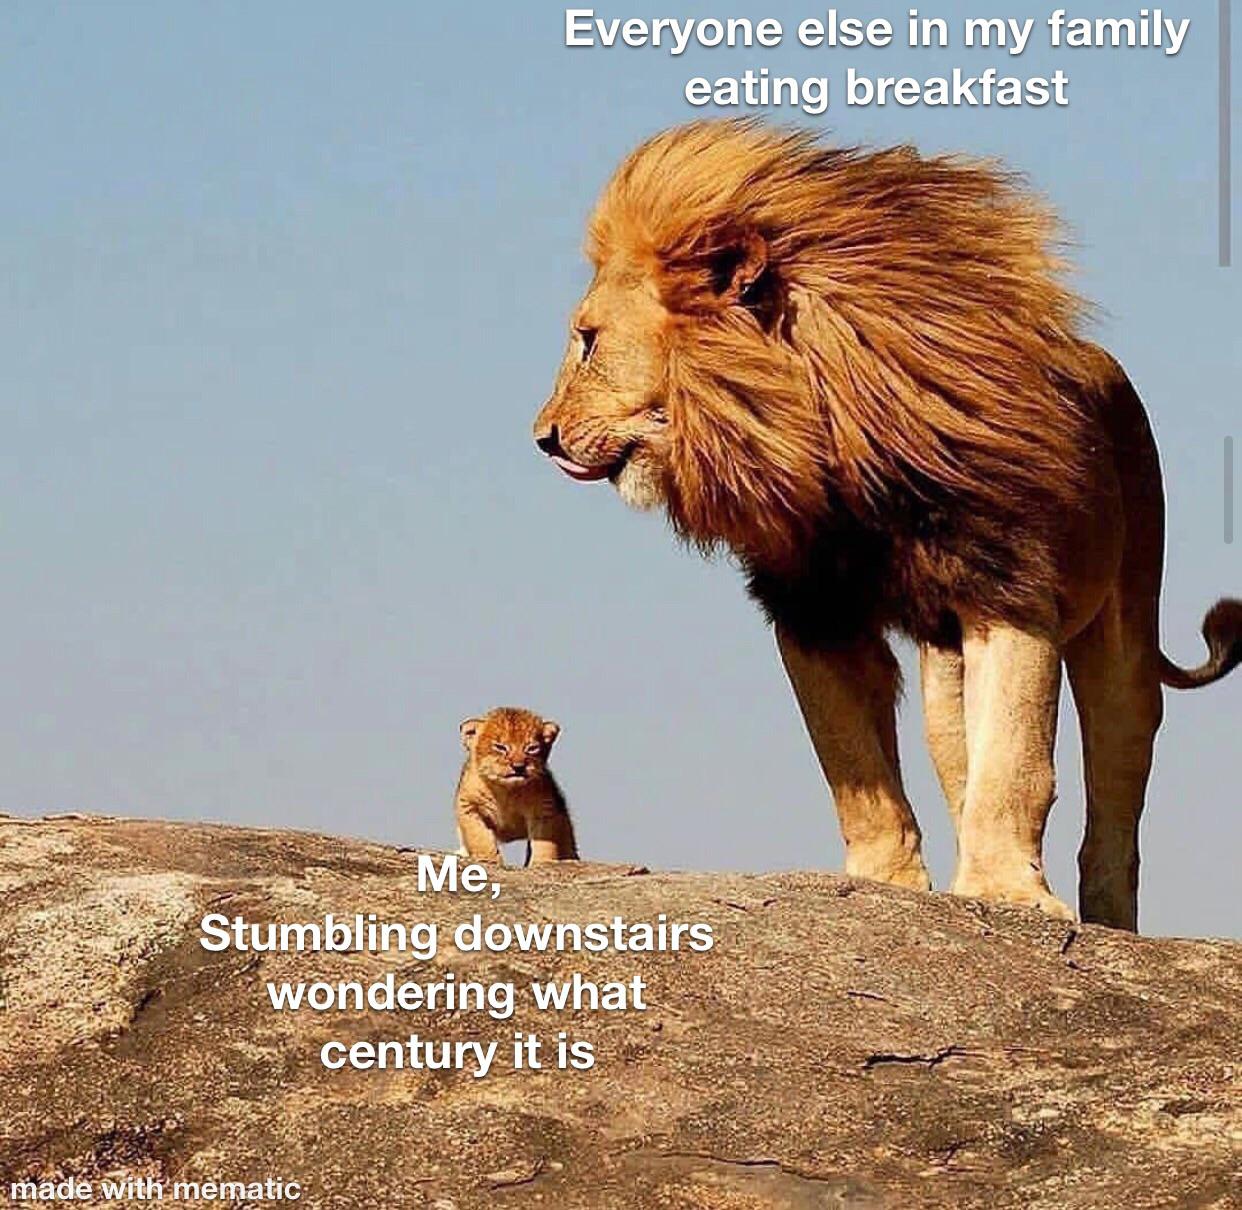 lion and his cub - Everyone else in my family eating breakfast Me, Stumbling downstairs wondering what century it is made with mematic